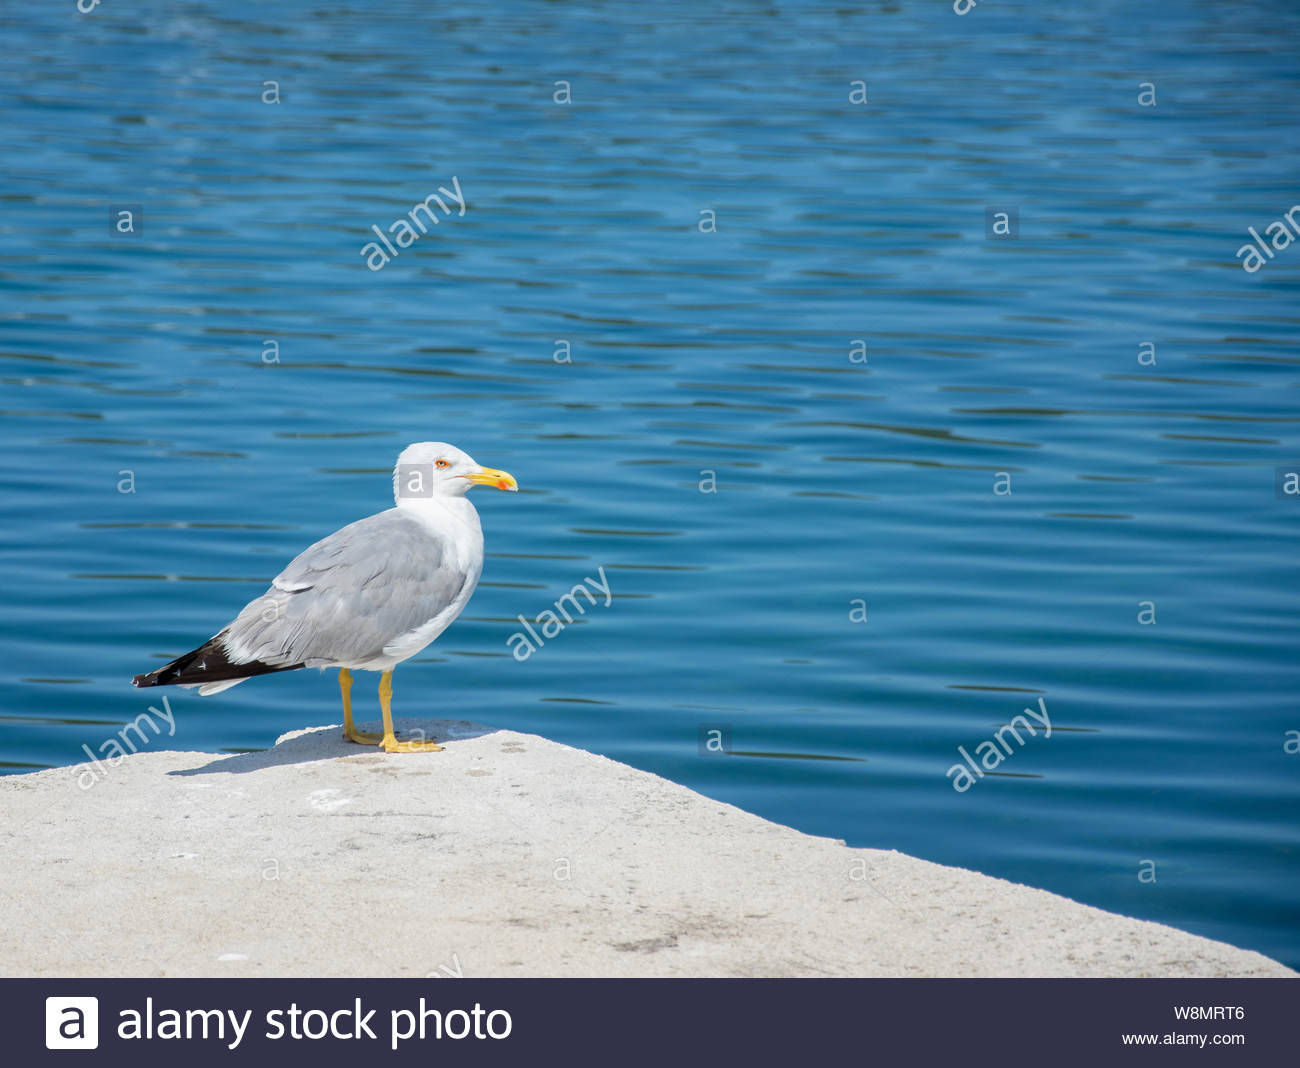 One seagull standing on the concrete pier with the background of 1300x1068